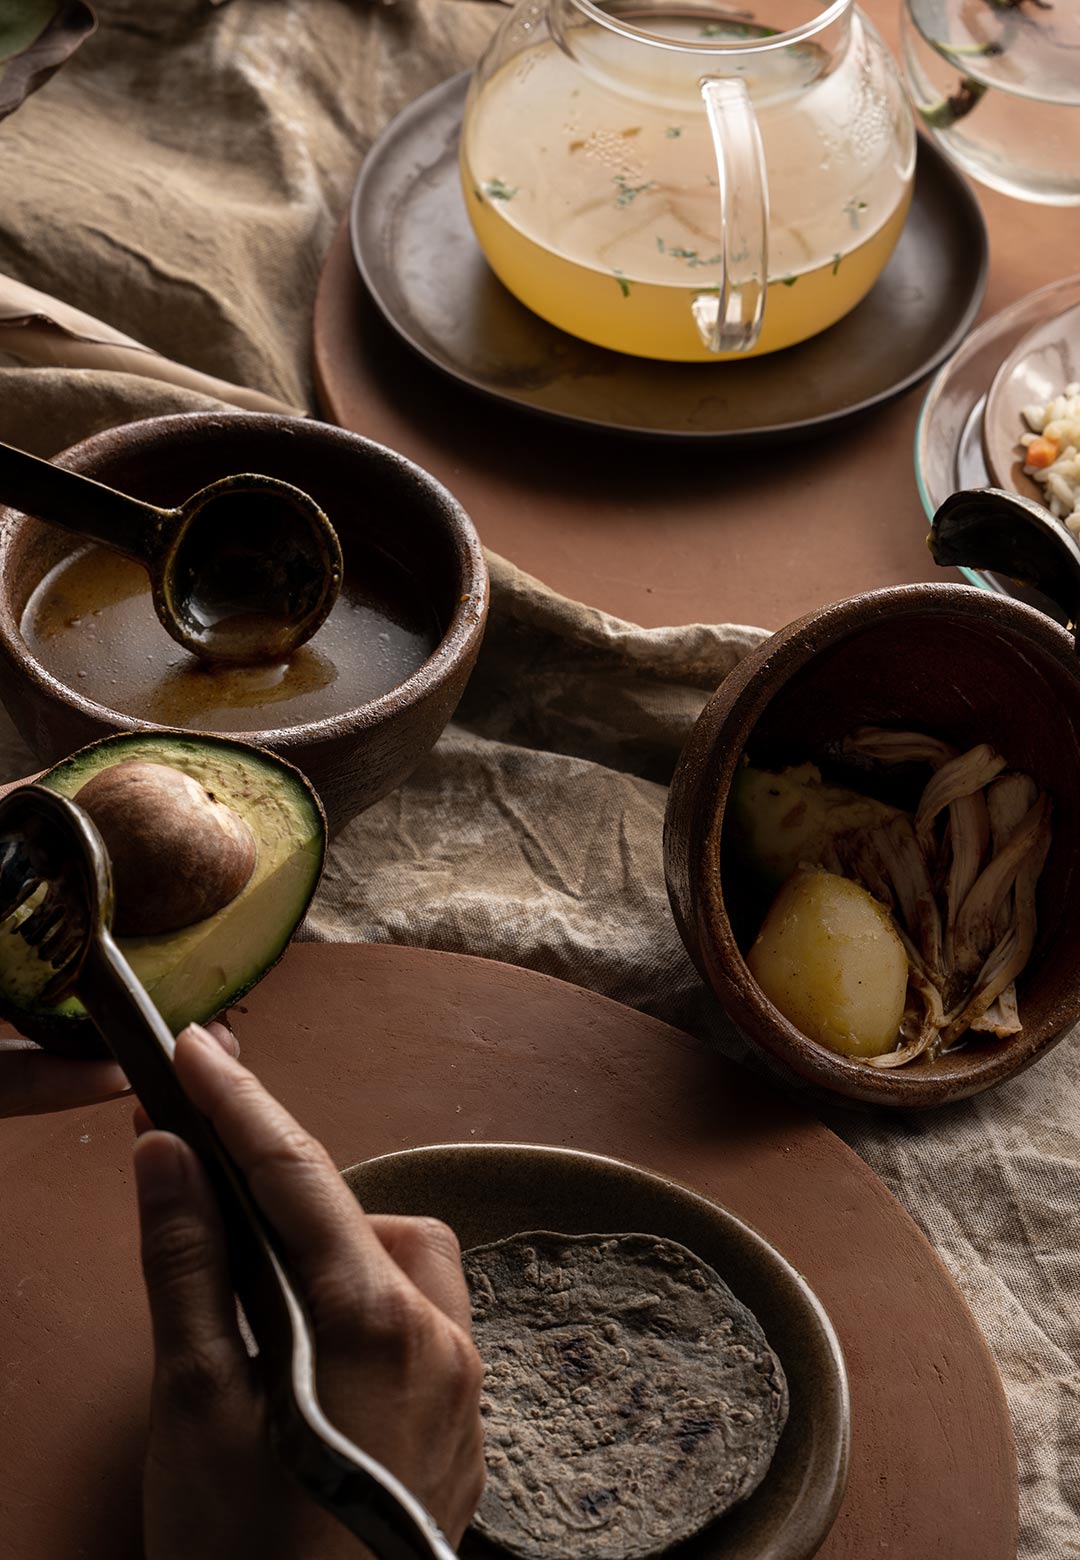 Cinco x Cinco’s new collection brings ceremonial utensils to the Guatemalan table